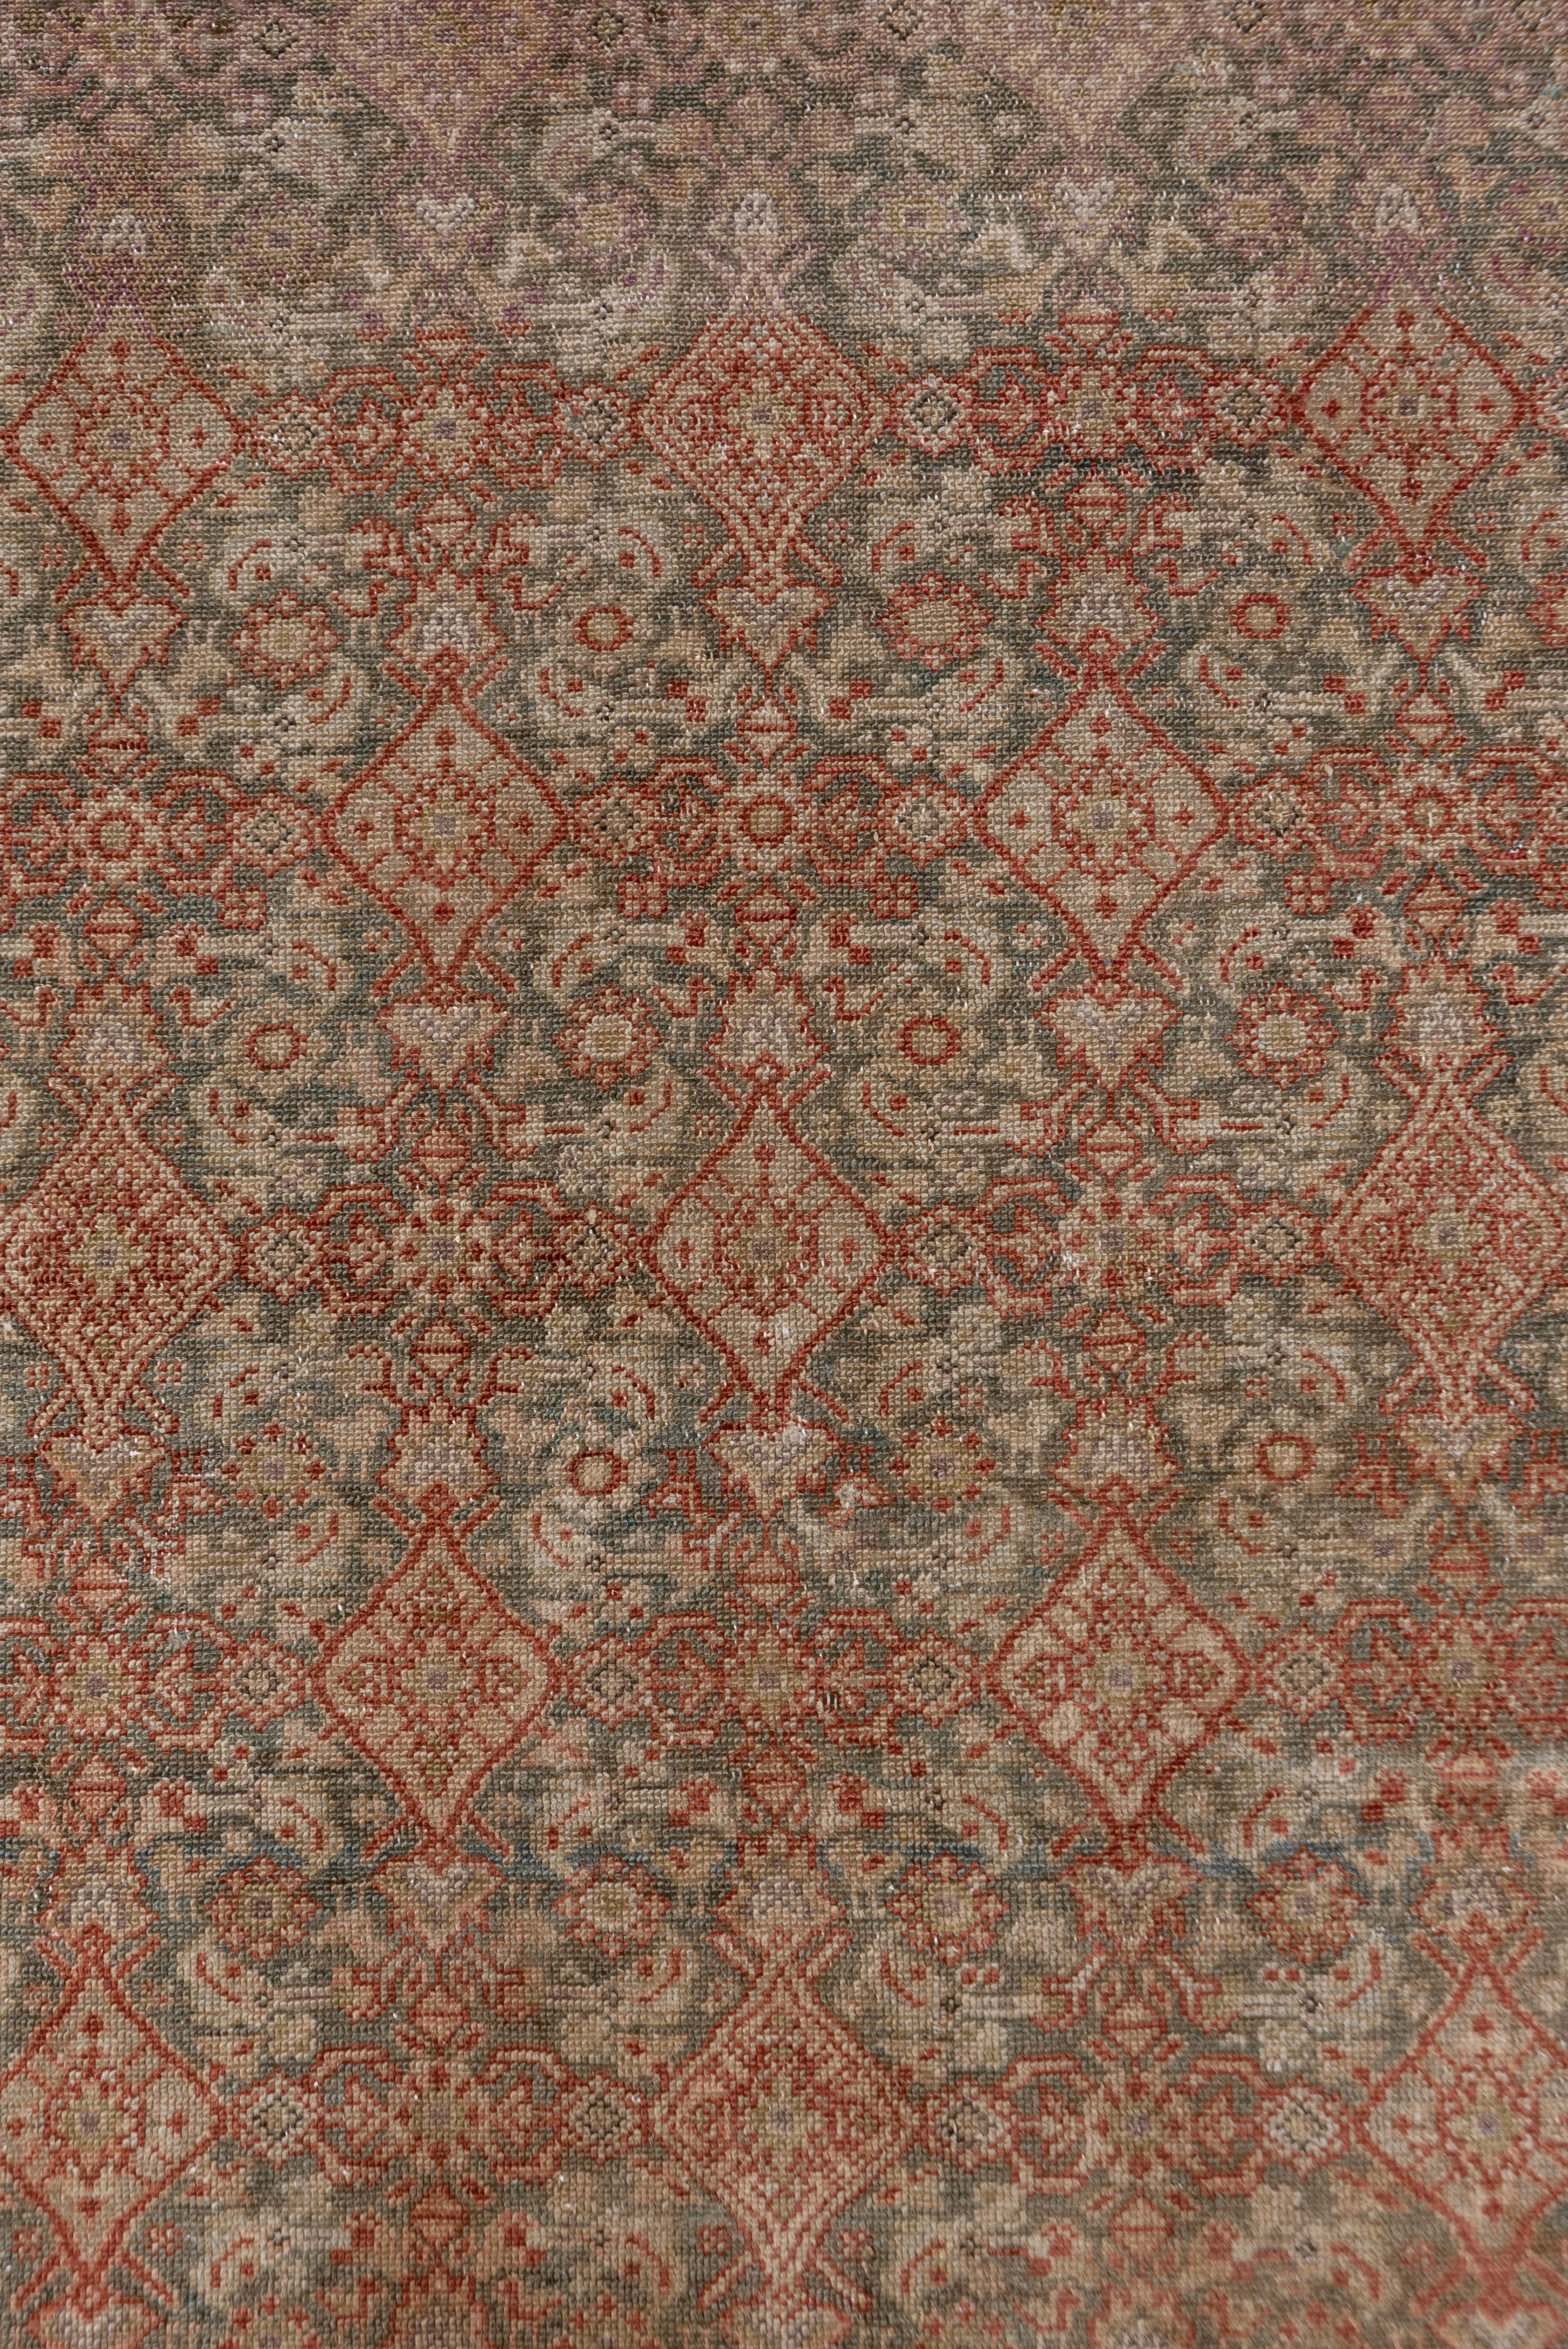 Hand-Knotted Rustic Antique Persian Malayer Rug, All-Over Brown and Blue Herati Design Field